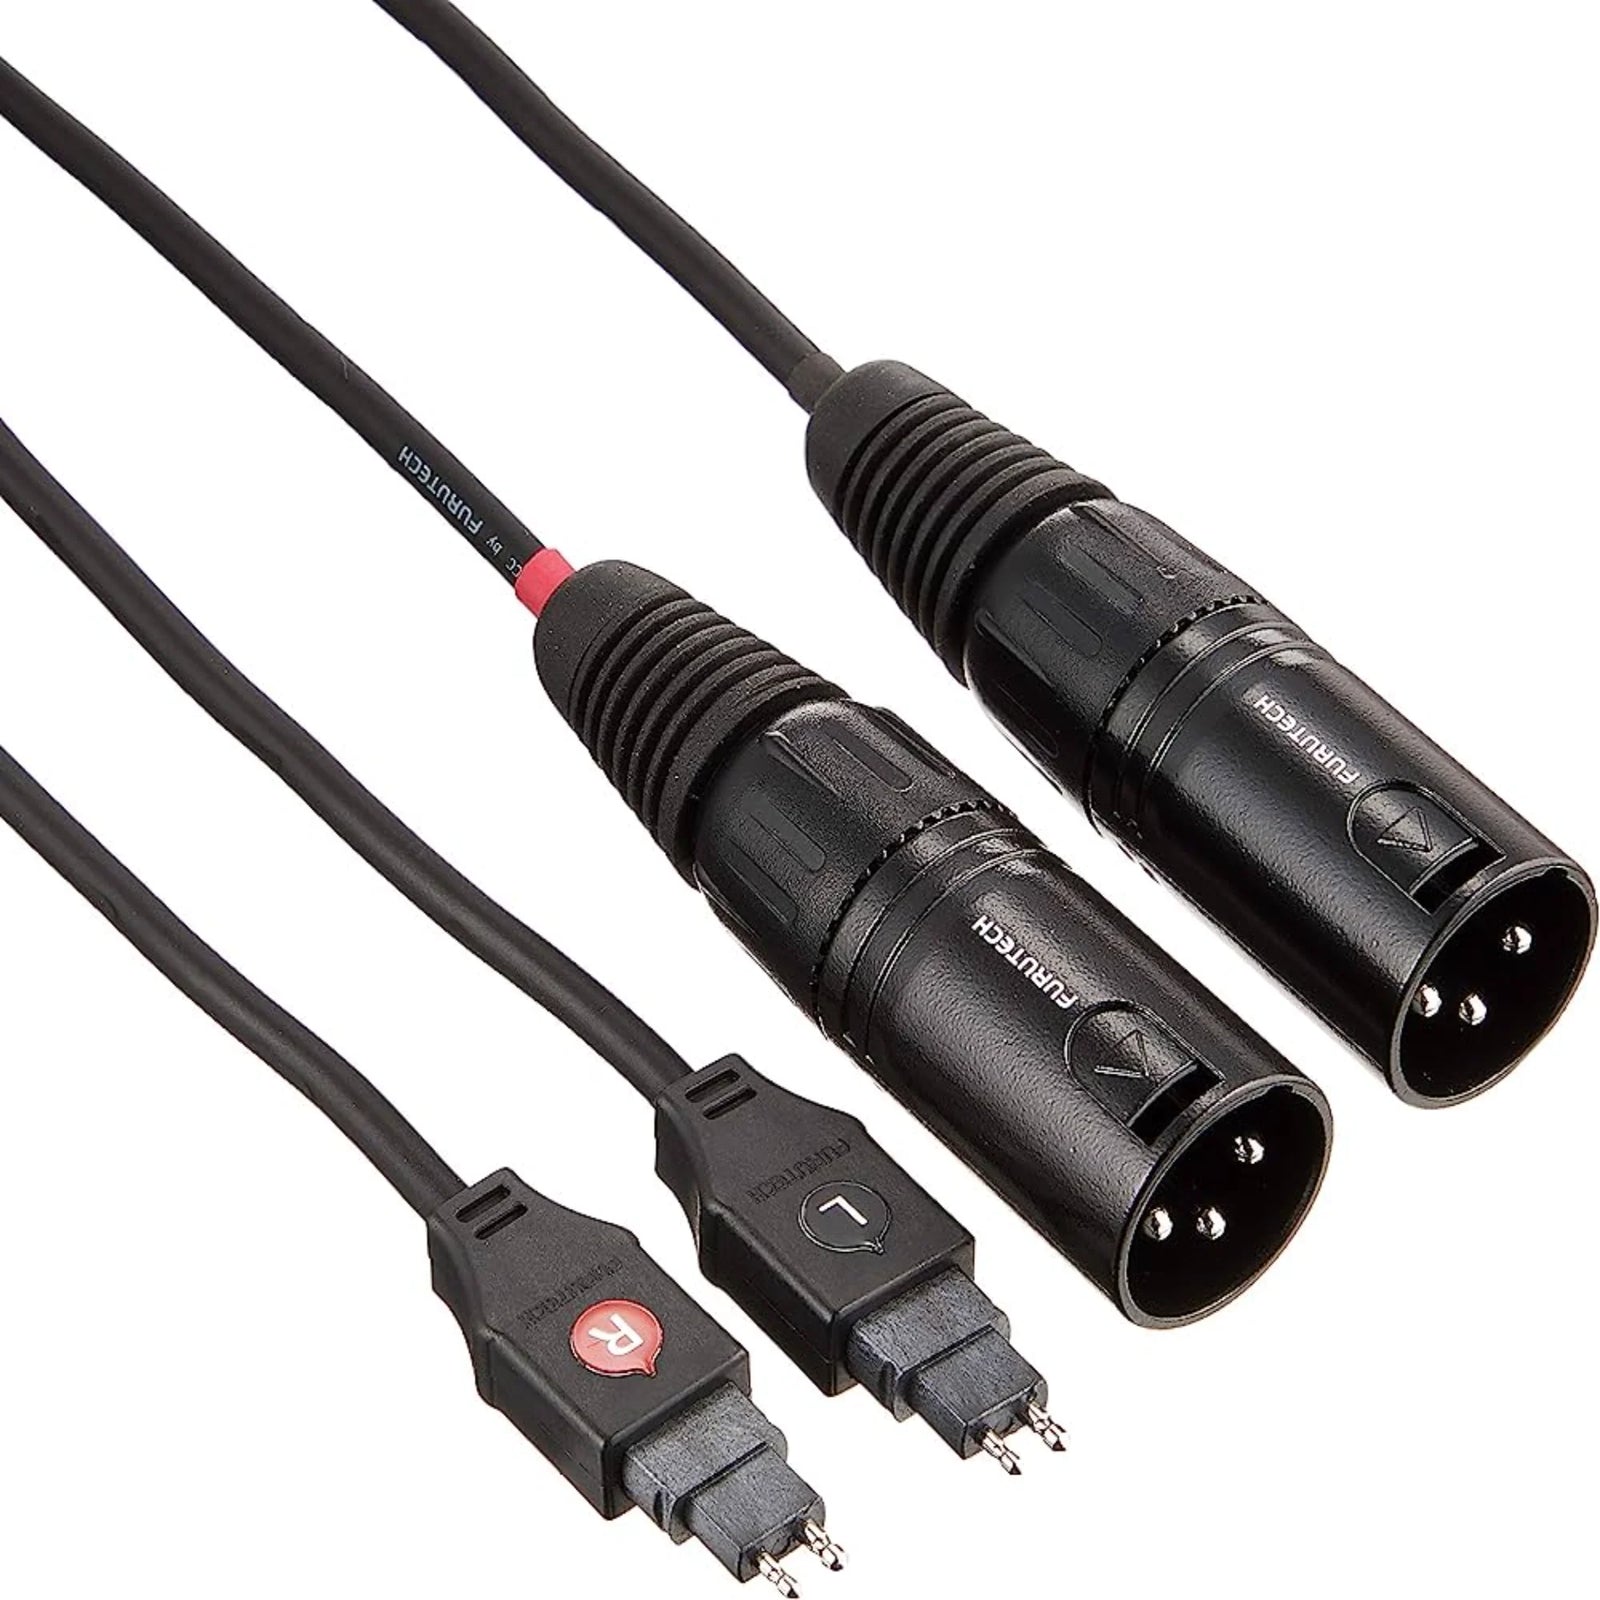 ALPHA DESIGN LABS HEADPHONE CABLE iHP-35S-1.3m Headphone Cable 6.3mm stereo to 2 Pin connector for Sennheiser (1.3M) iHP-35S-3.0m Headphone Cable 6.3mm stereo to 2 Pin connector for Sennheiser (3.0M) iHP-35S-XLR-1.3m Headphone Cable XLR to 2 Pin connector for Sennheiser Headphone Available at Vinyl Sound